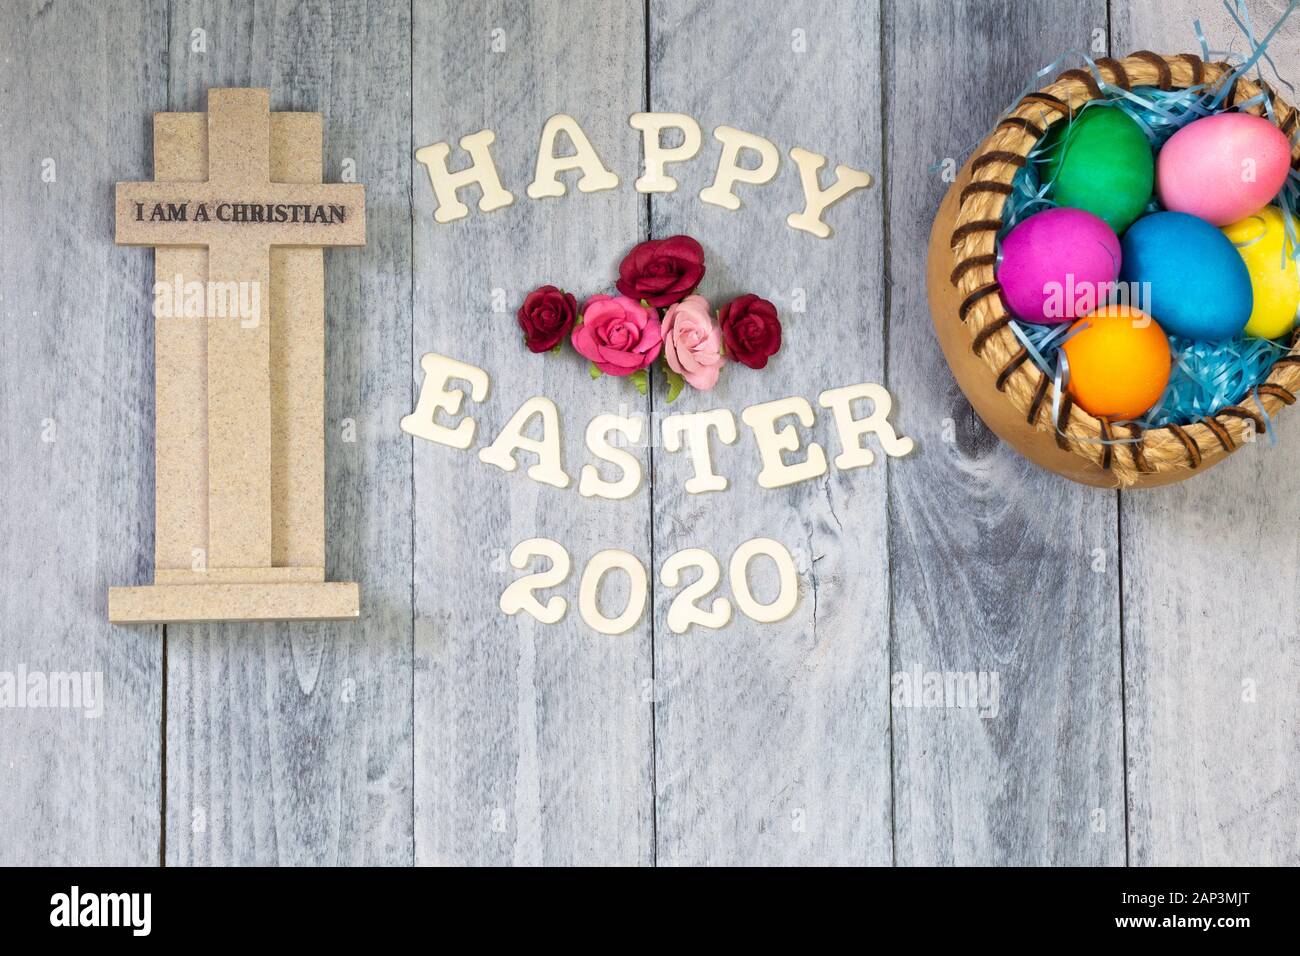 Christian Cross, flowers, Easter eggs, on a wood background with Happy Easter 2020 Stock Photo